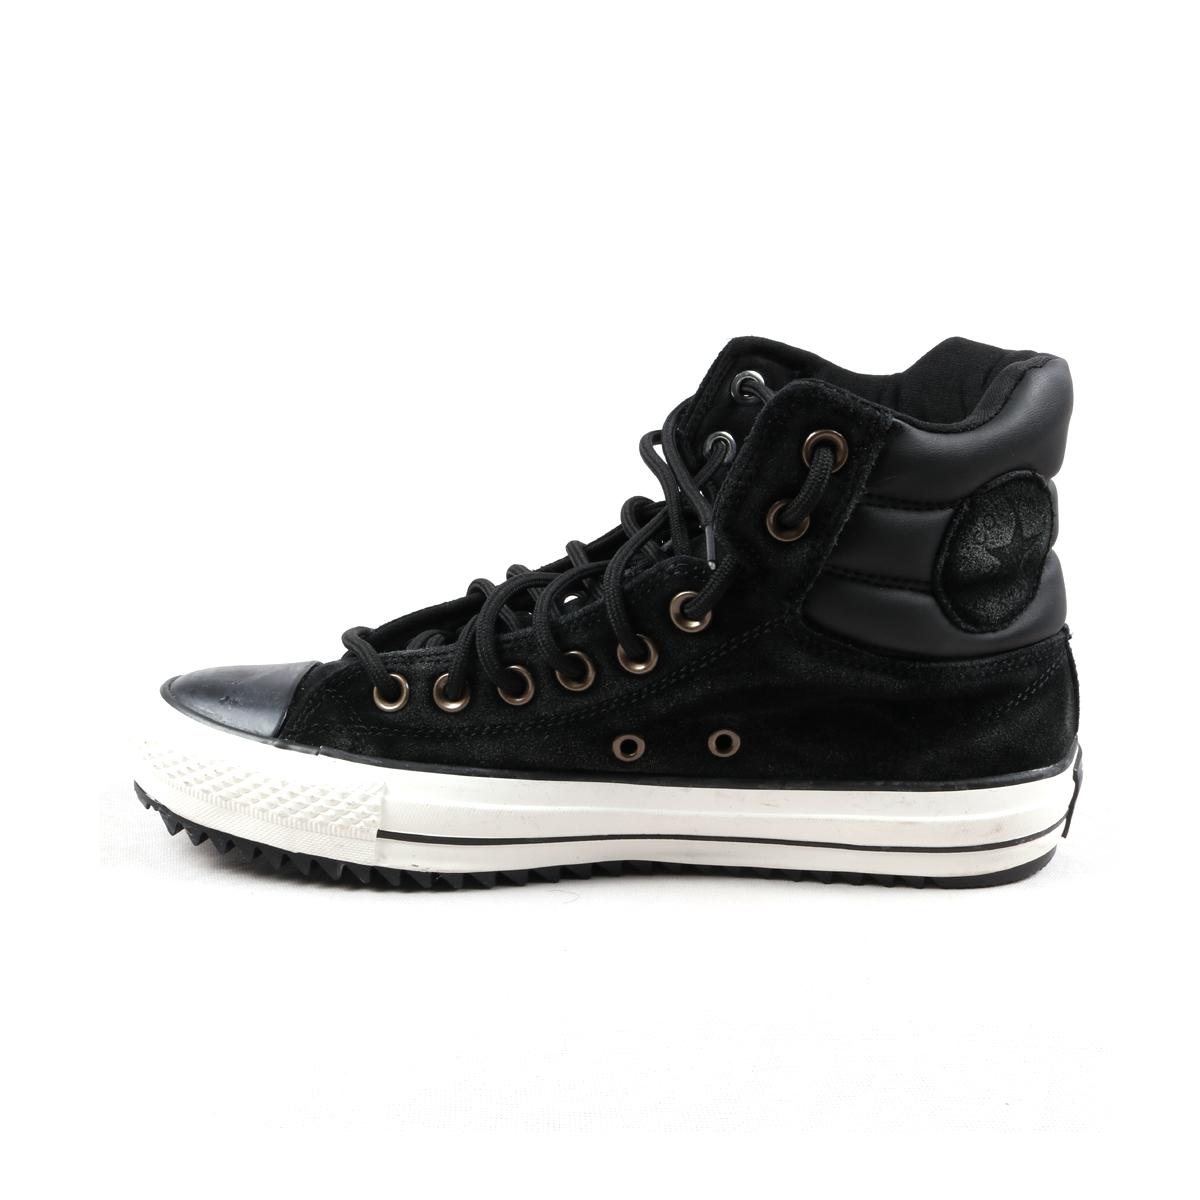 Best deals for All Star Converse Shoes For Men Black Color in Nepal ...